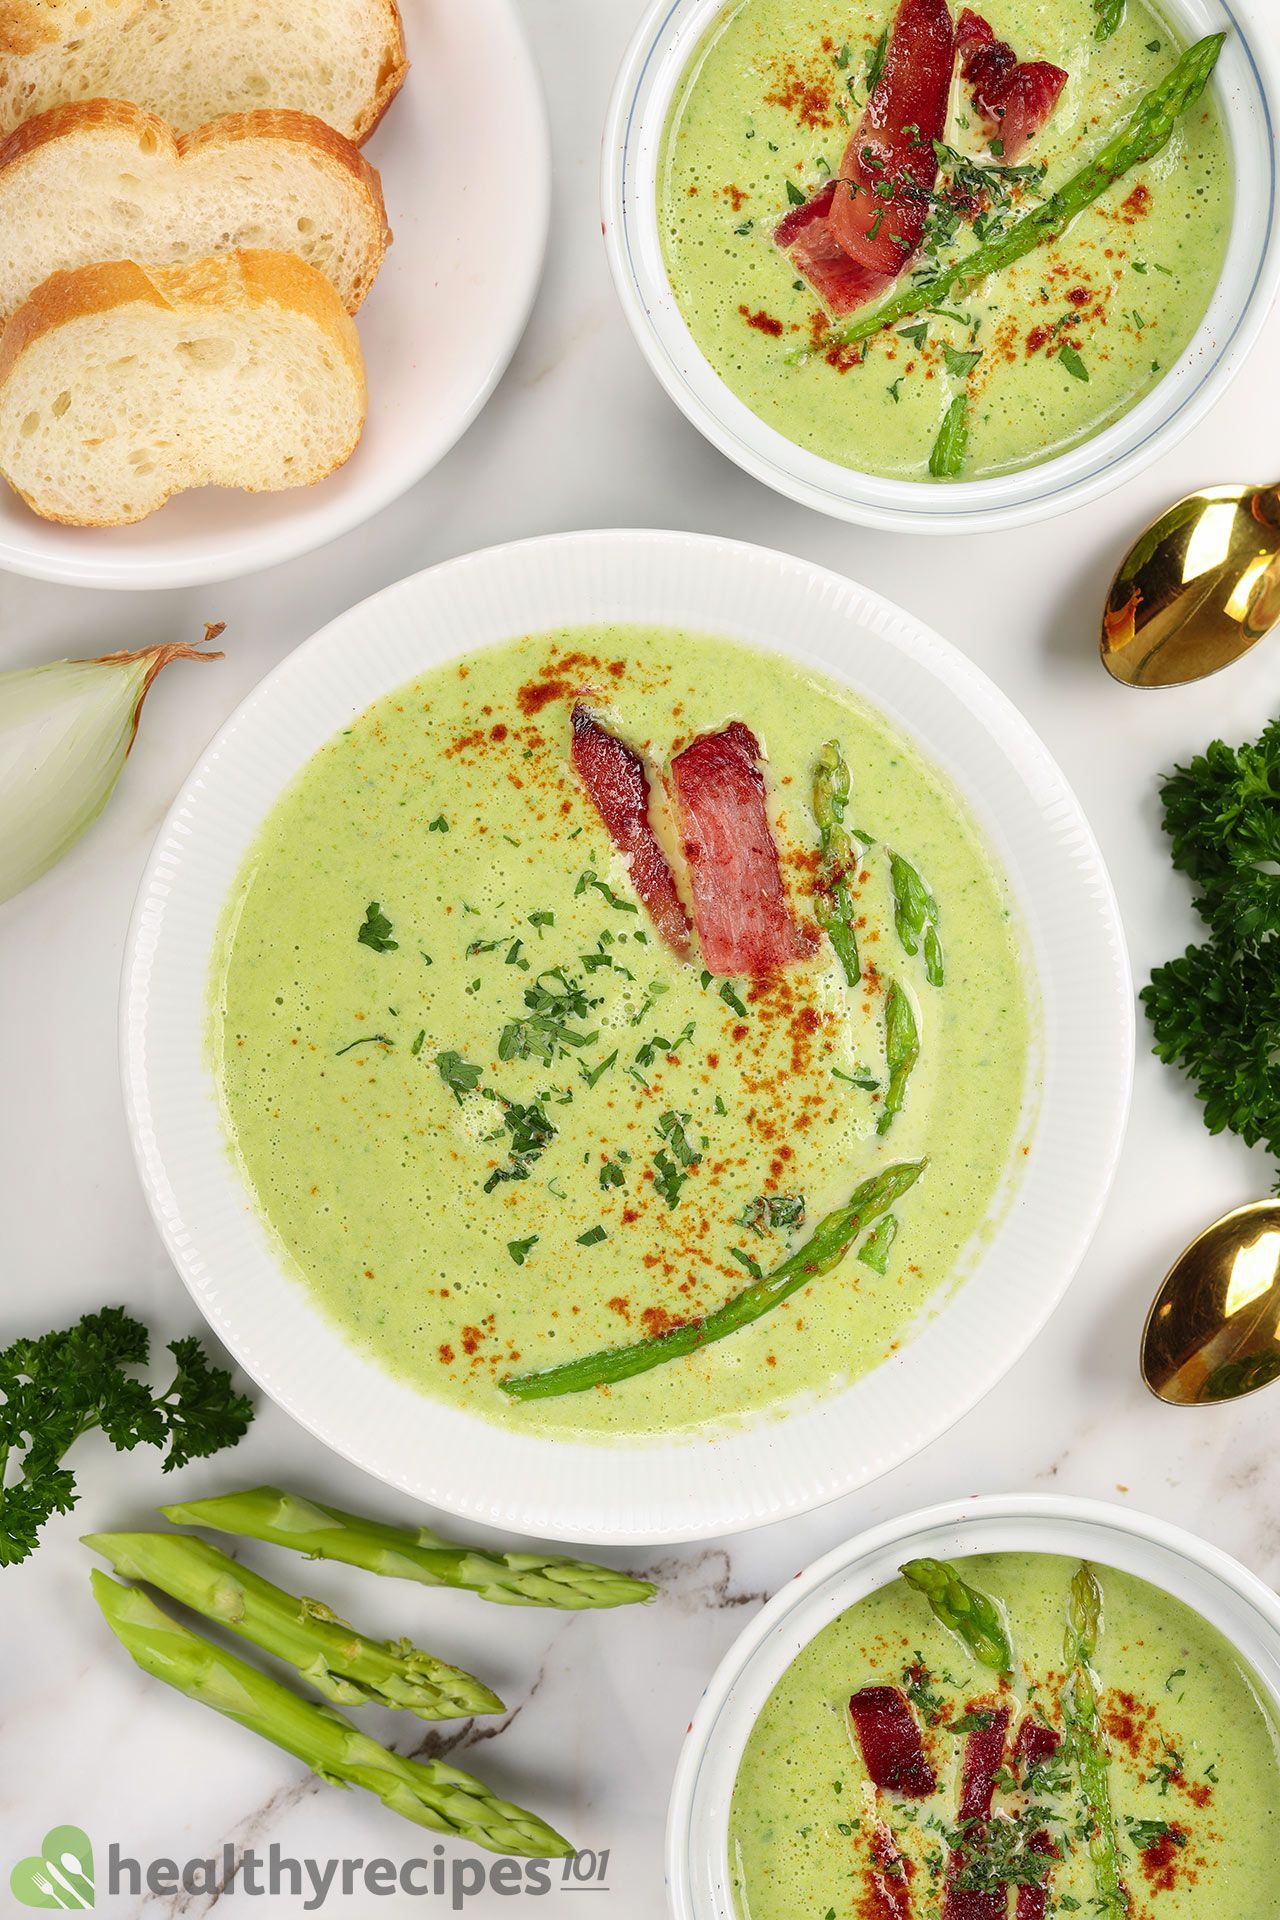 Serving, Storing, and Reheating Cream of Asparagus Soup